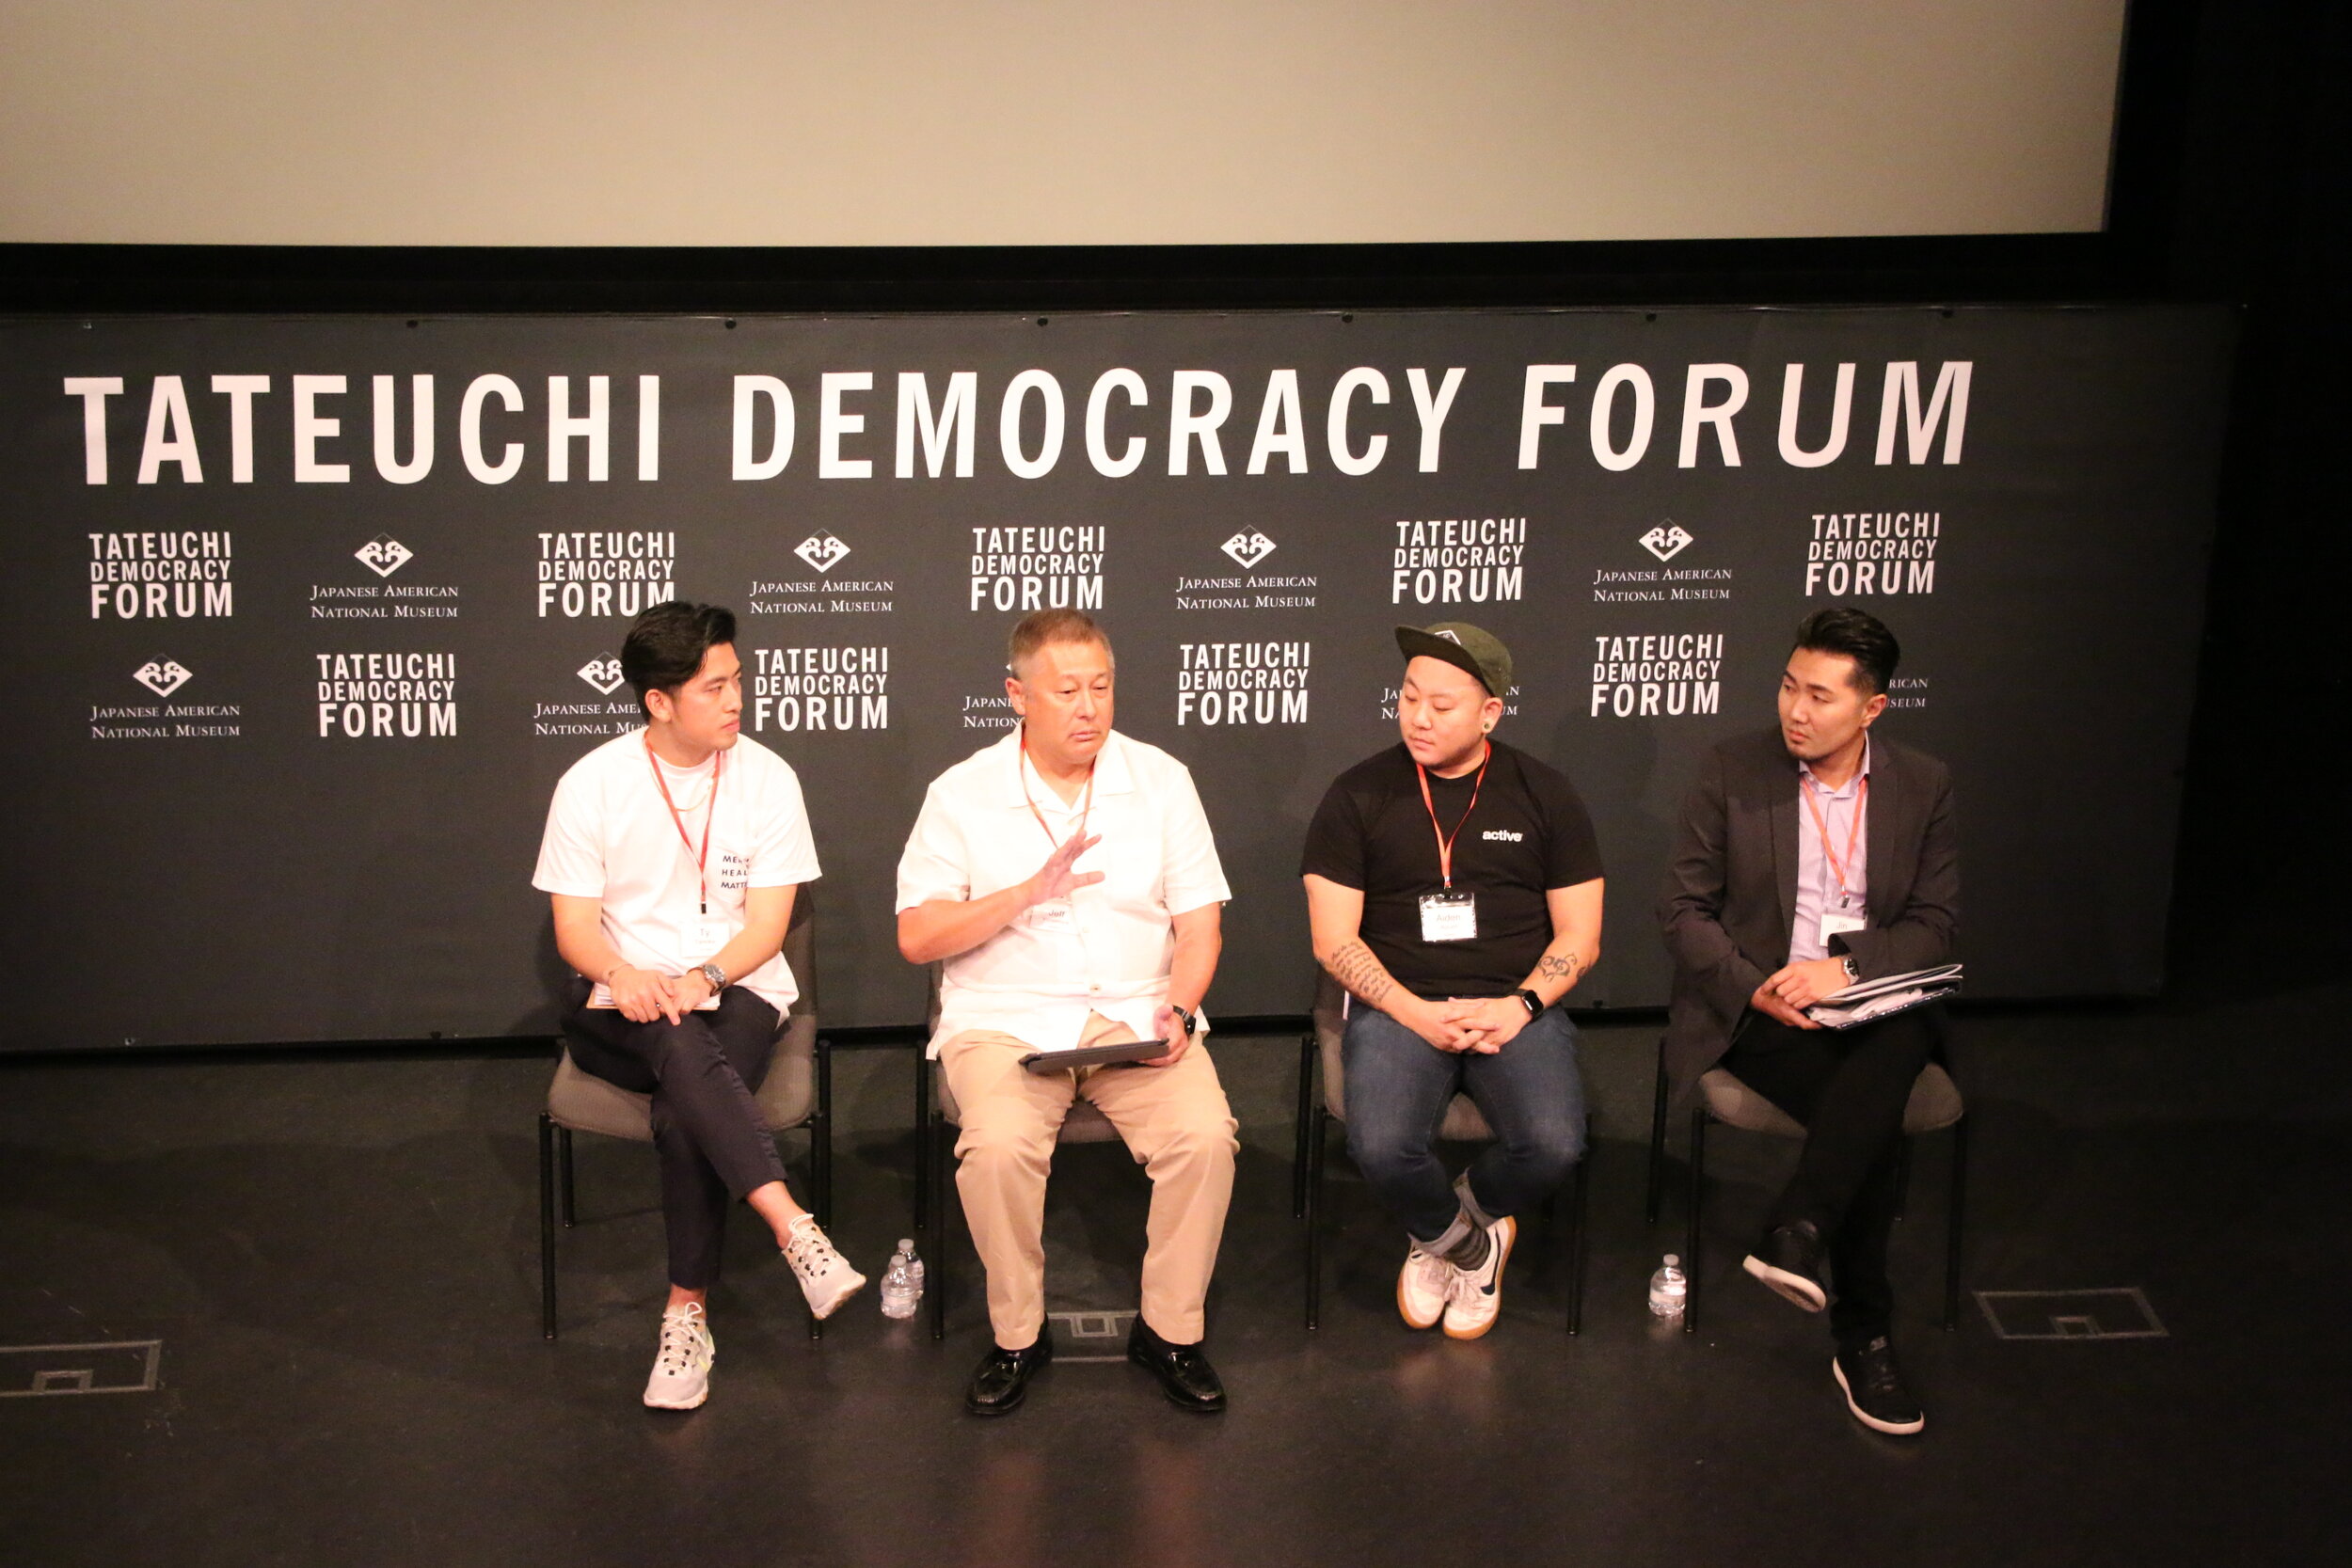 Four men sit in front of a step and repeat background that says “Japanese American National Museum” and “Tateuchi Democracy Forum.” 